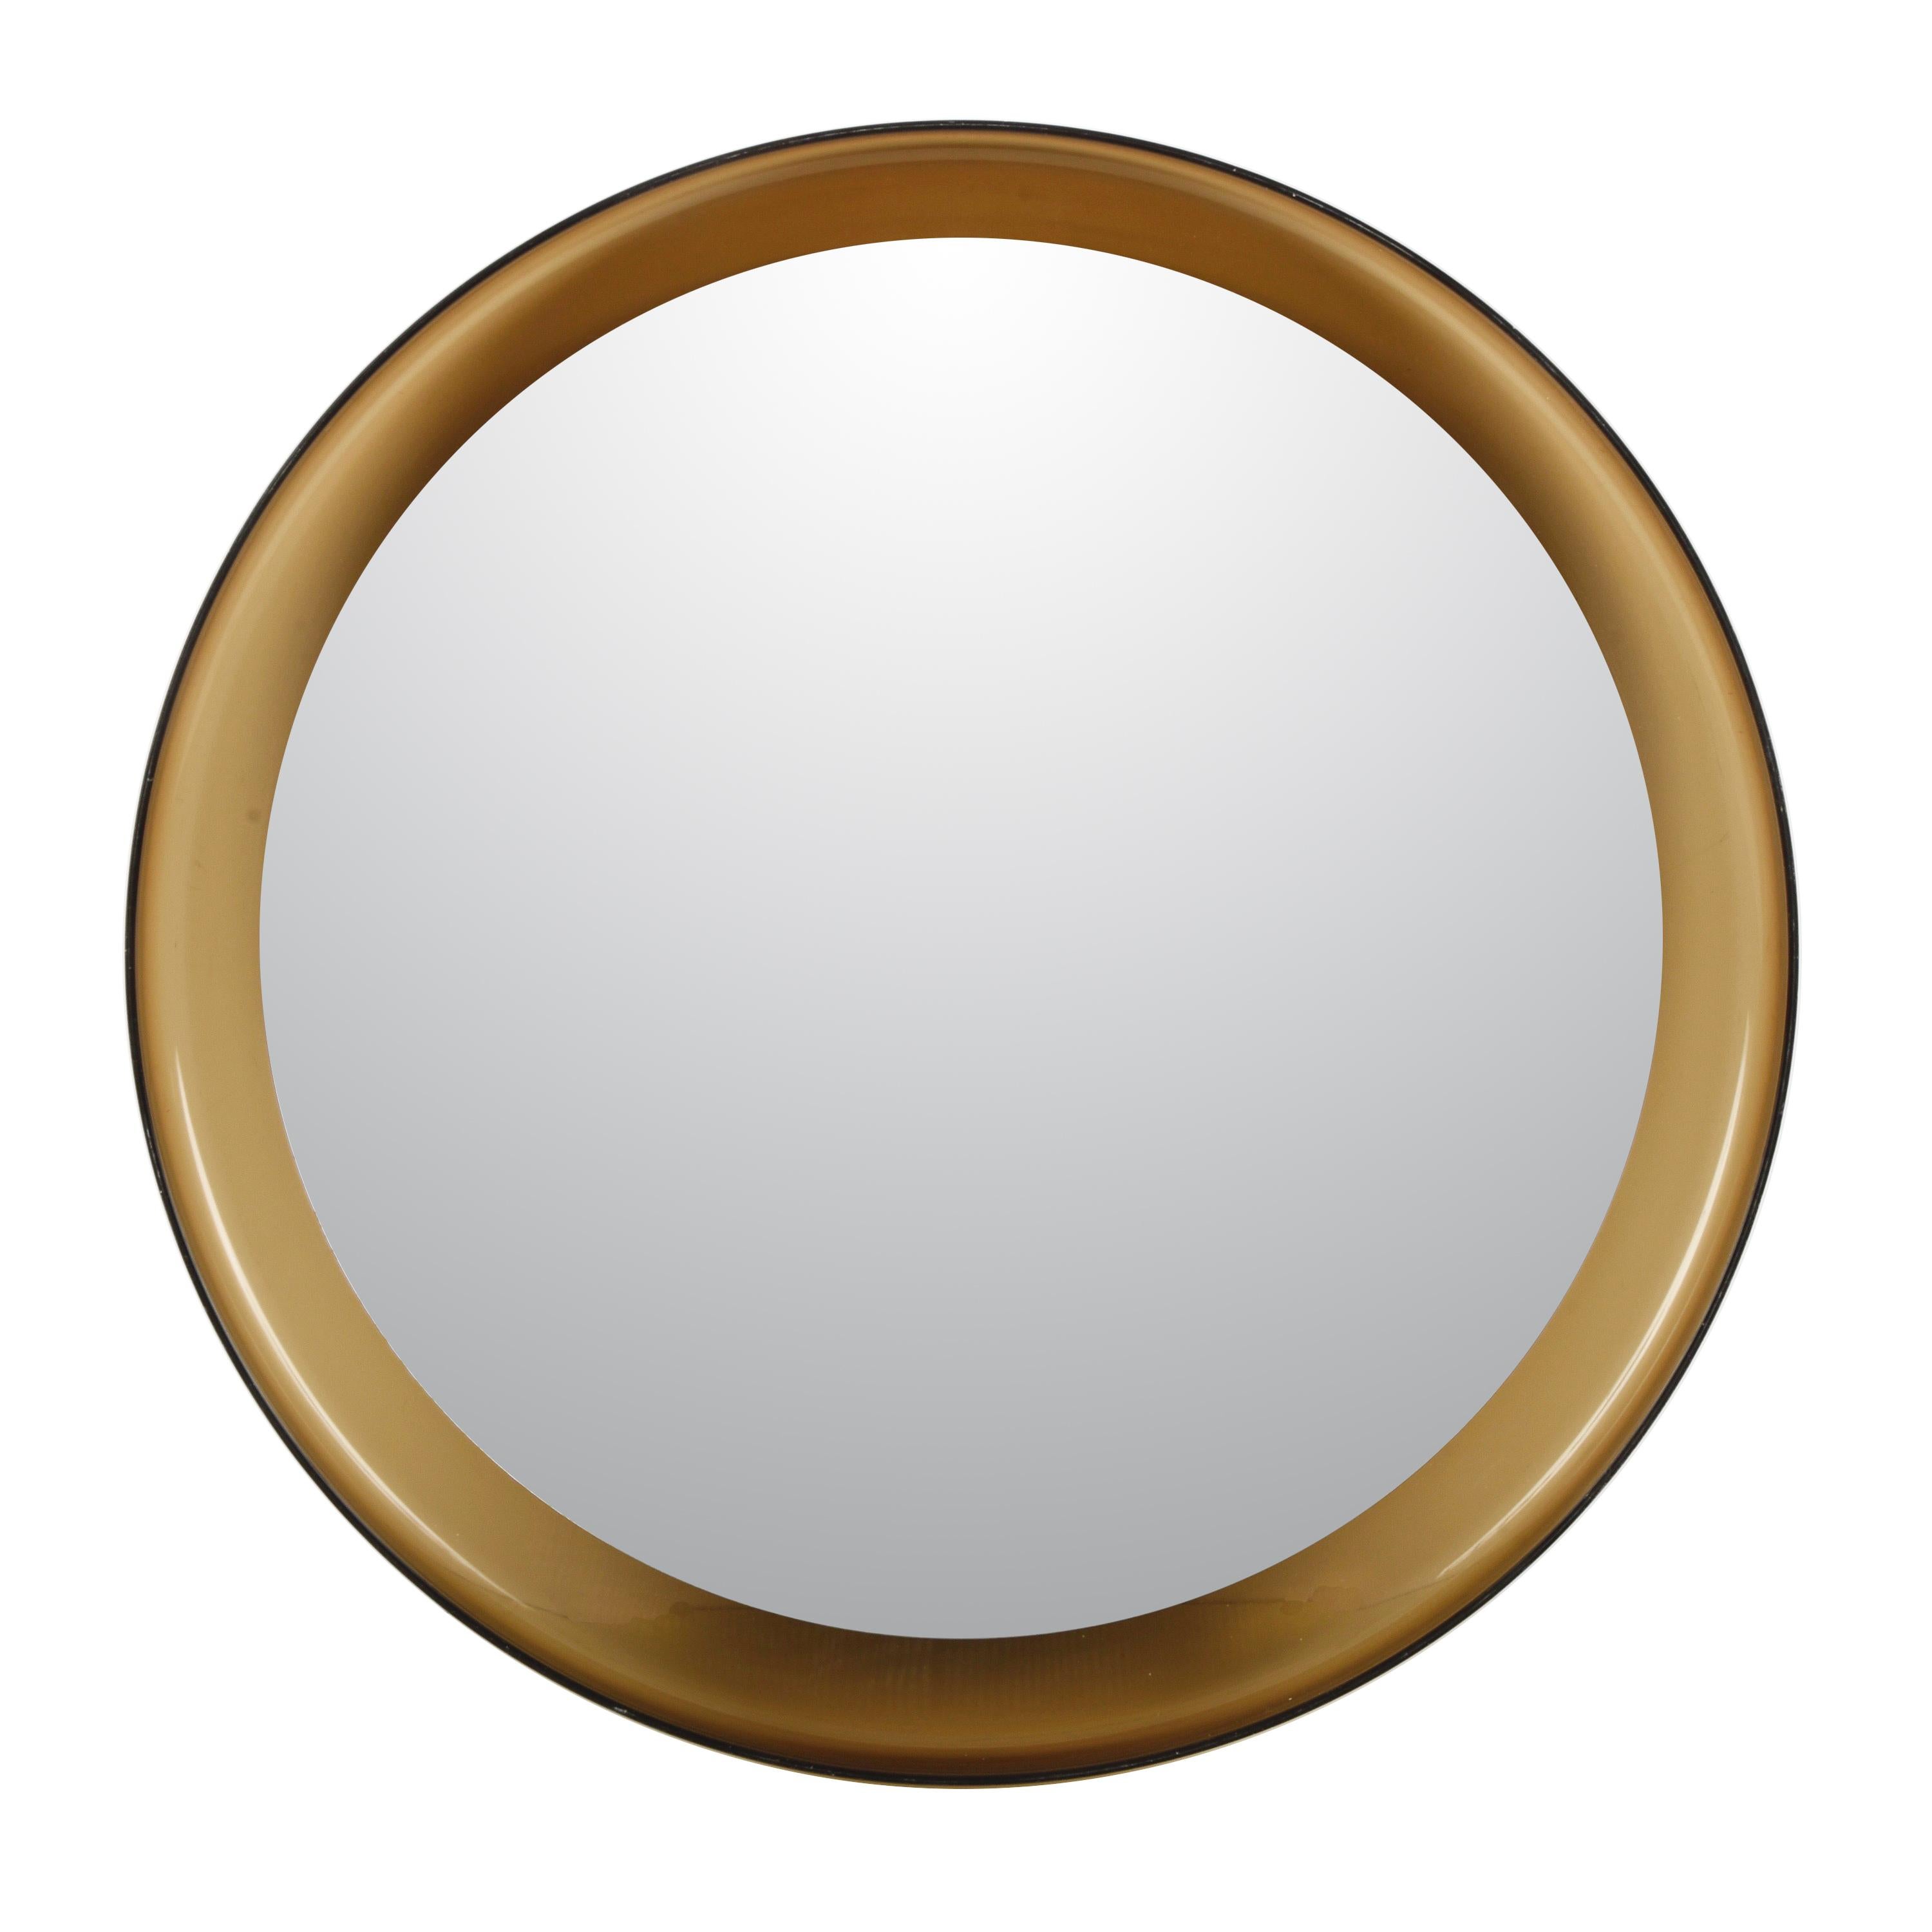 Midcentury Guzzini Italian Round Lucite Smoked Brown Wall Mirror, 1960s For Sale 2